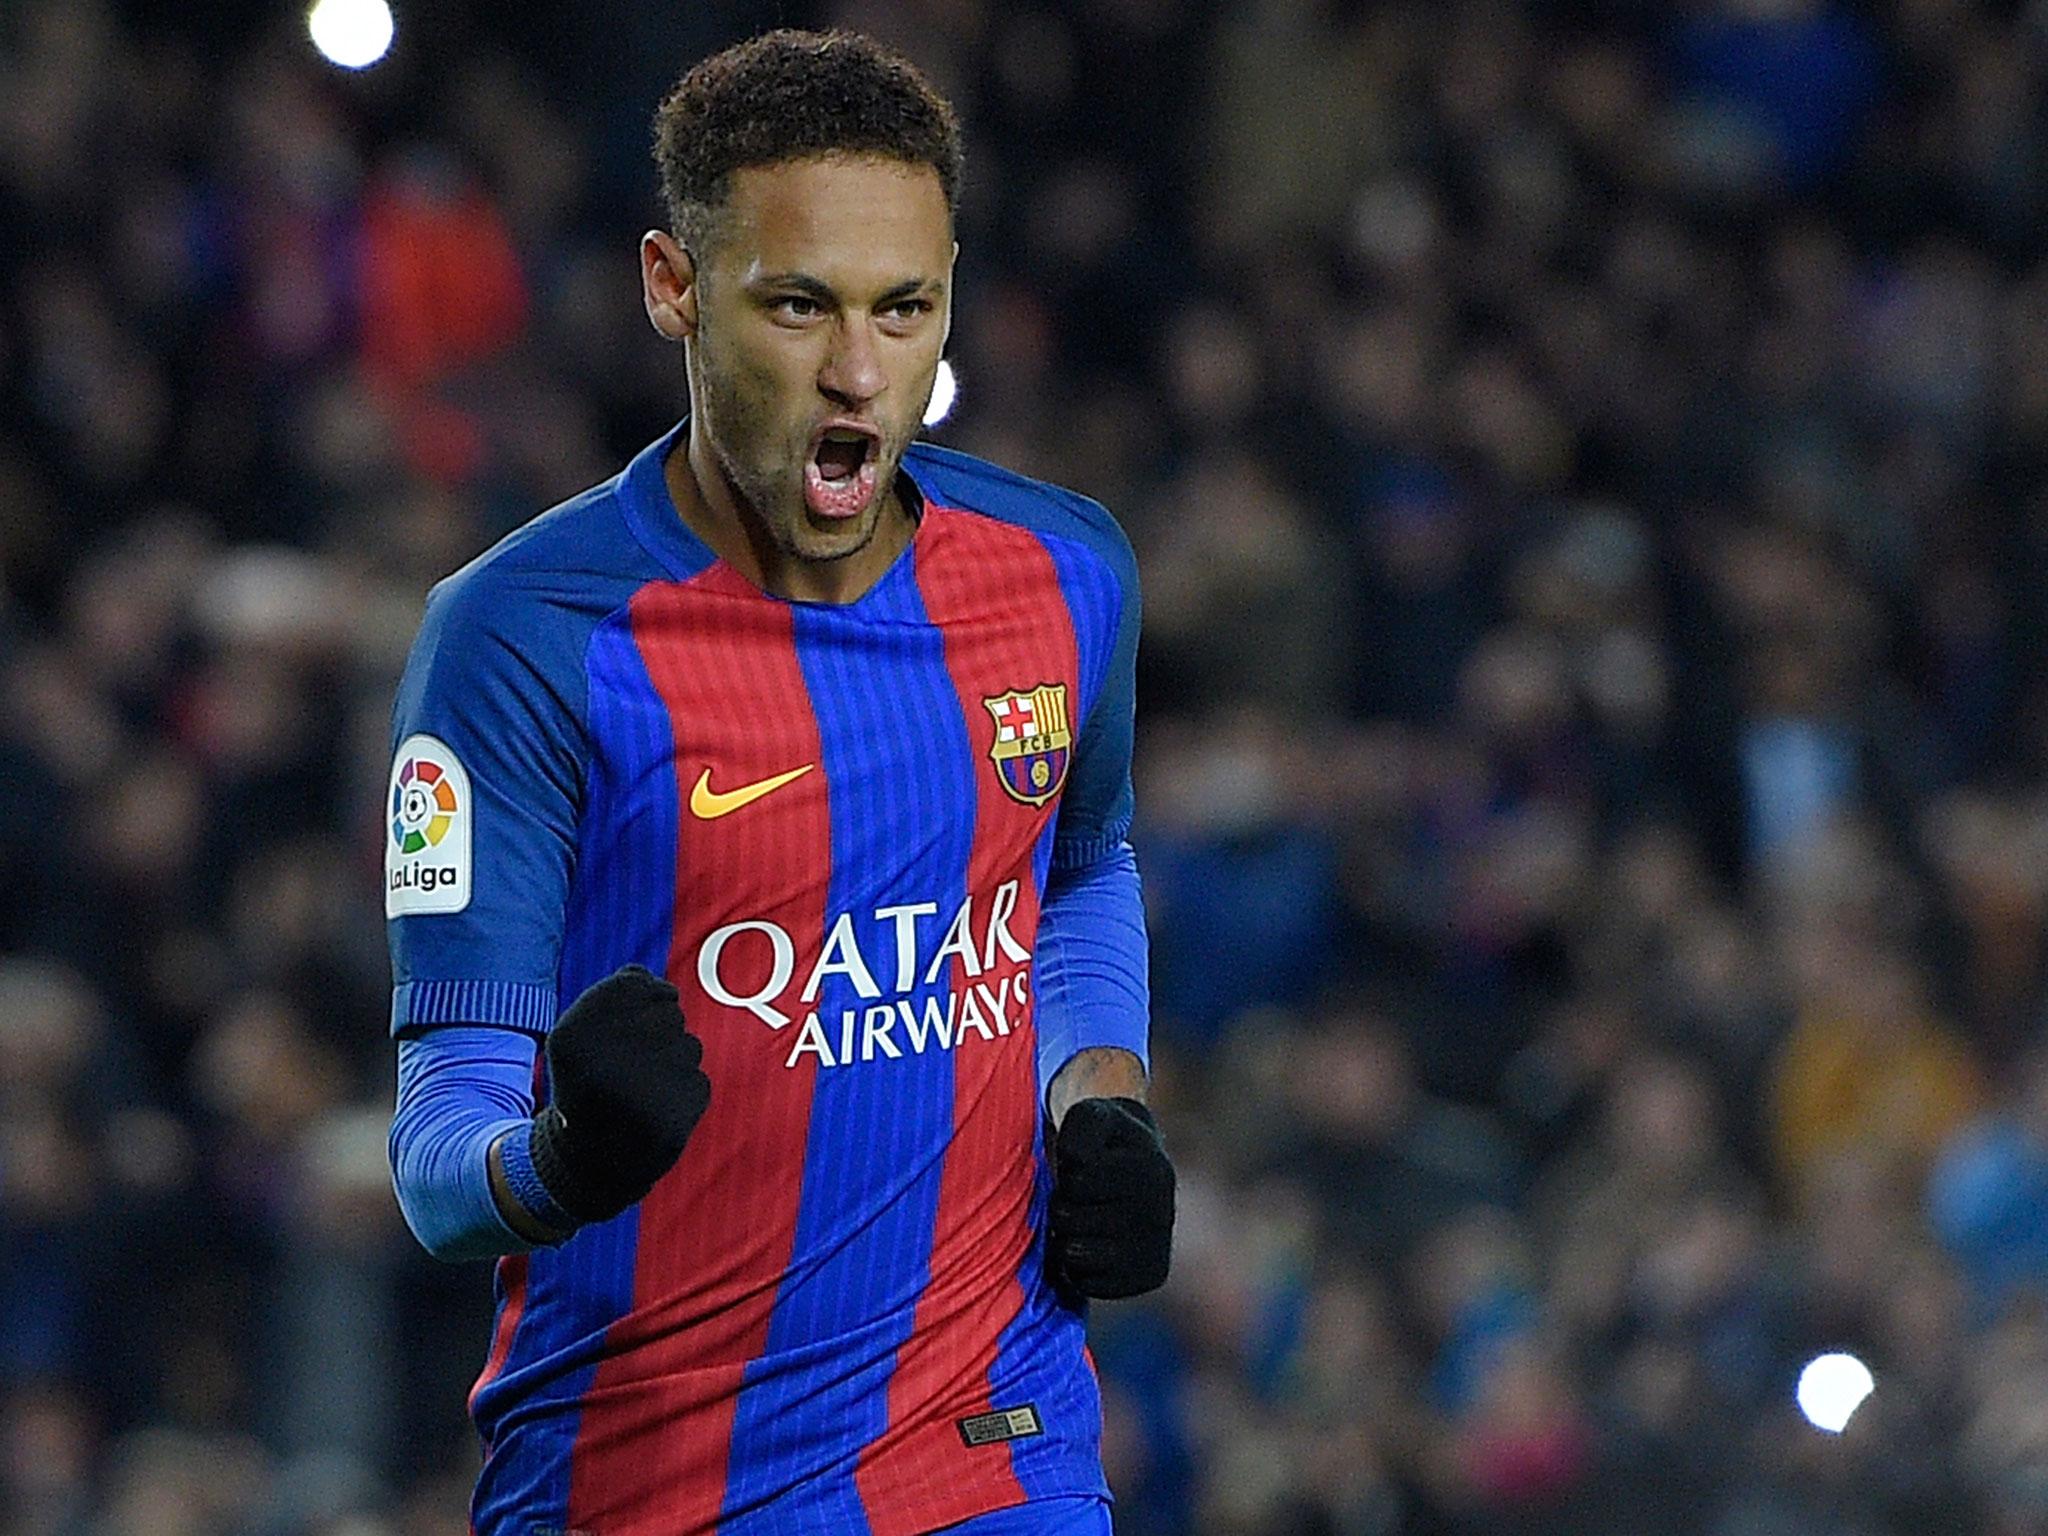 Manchester United are attempting to sign Neymar in a summer move from Barcelona